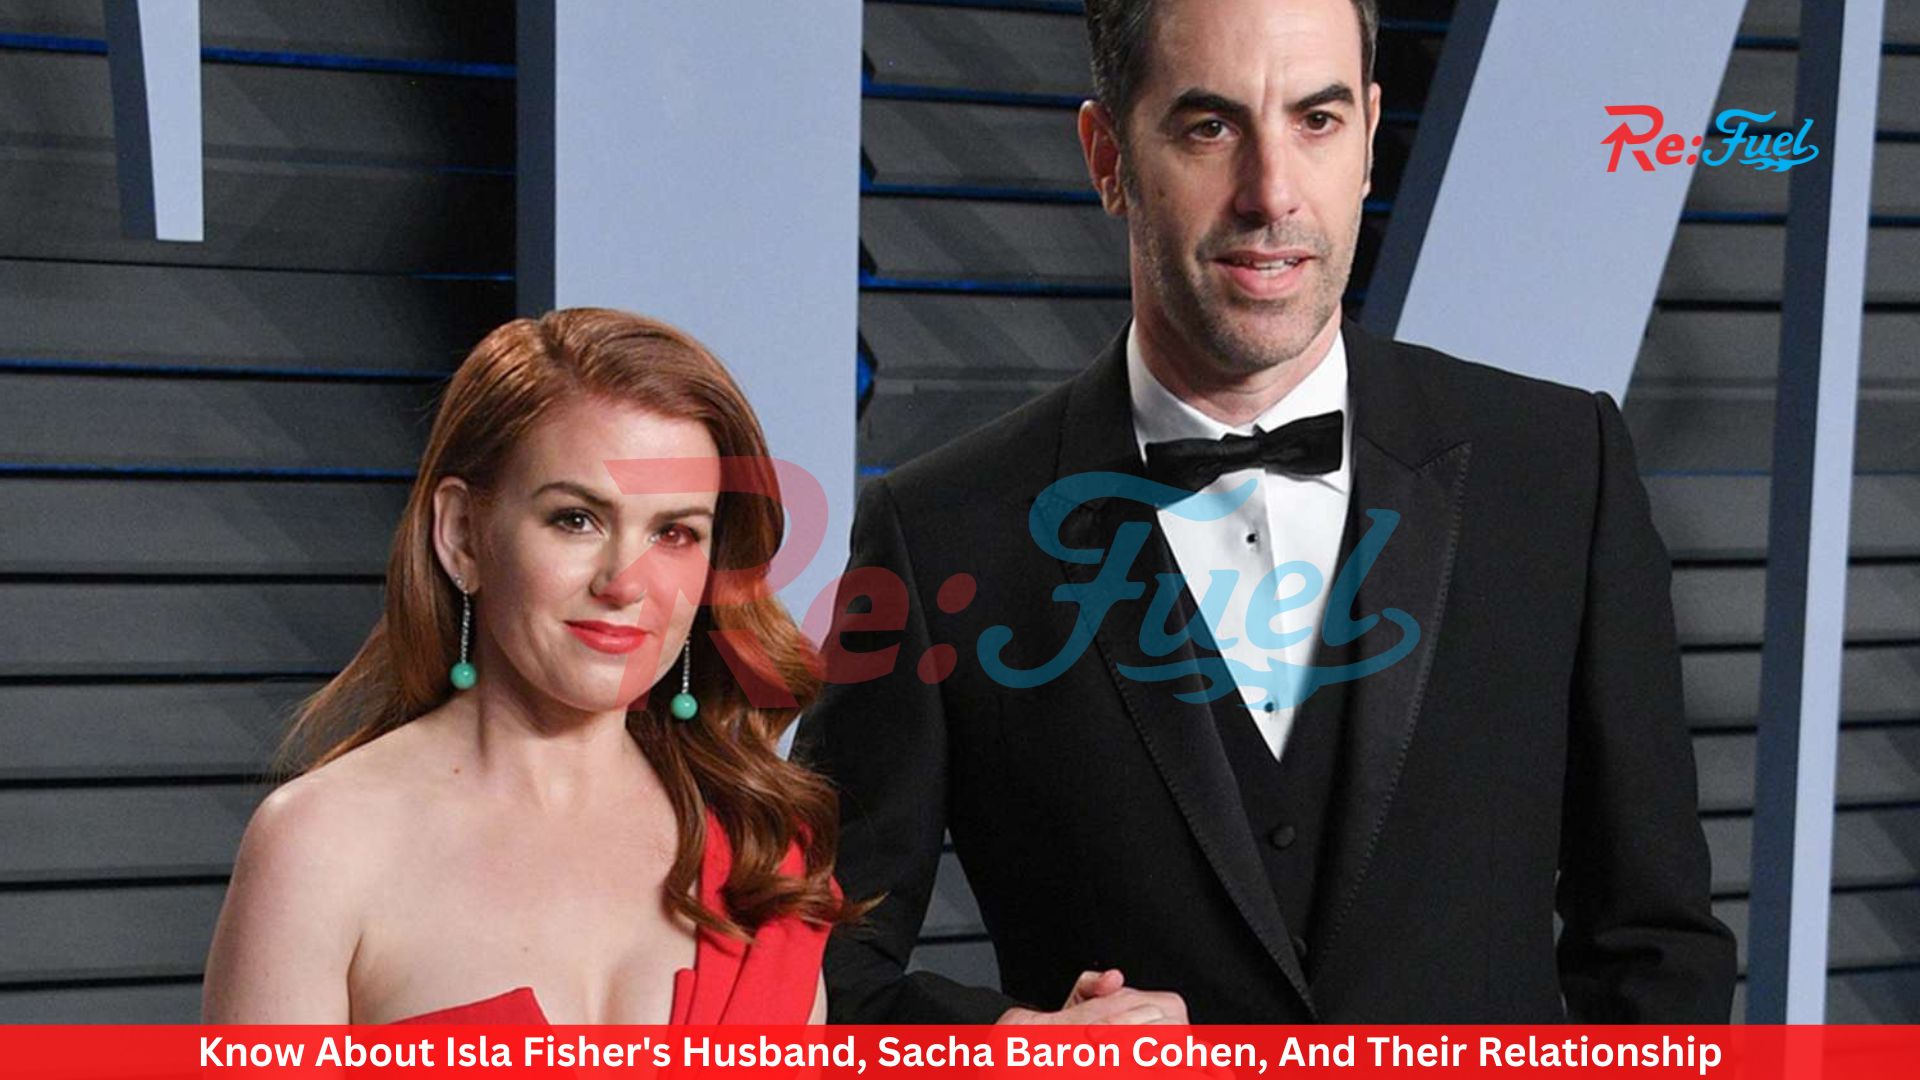 Know About Isla Fisher's Husband, Sacha Baron Cohen, And Their Relationship